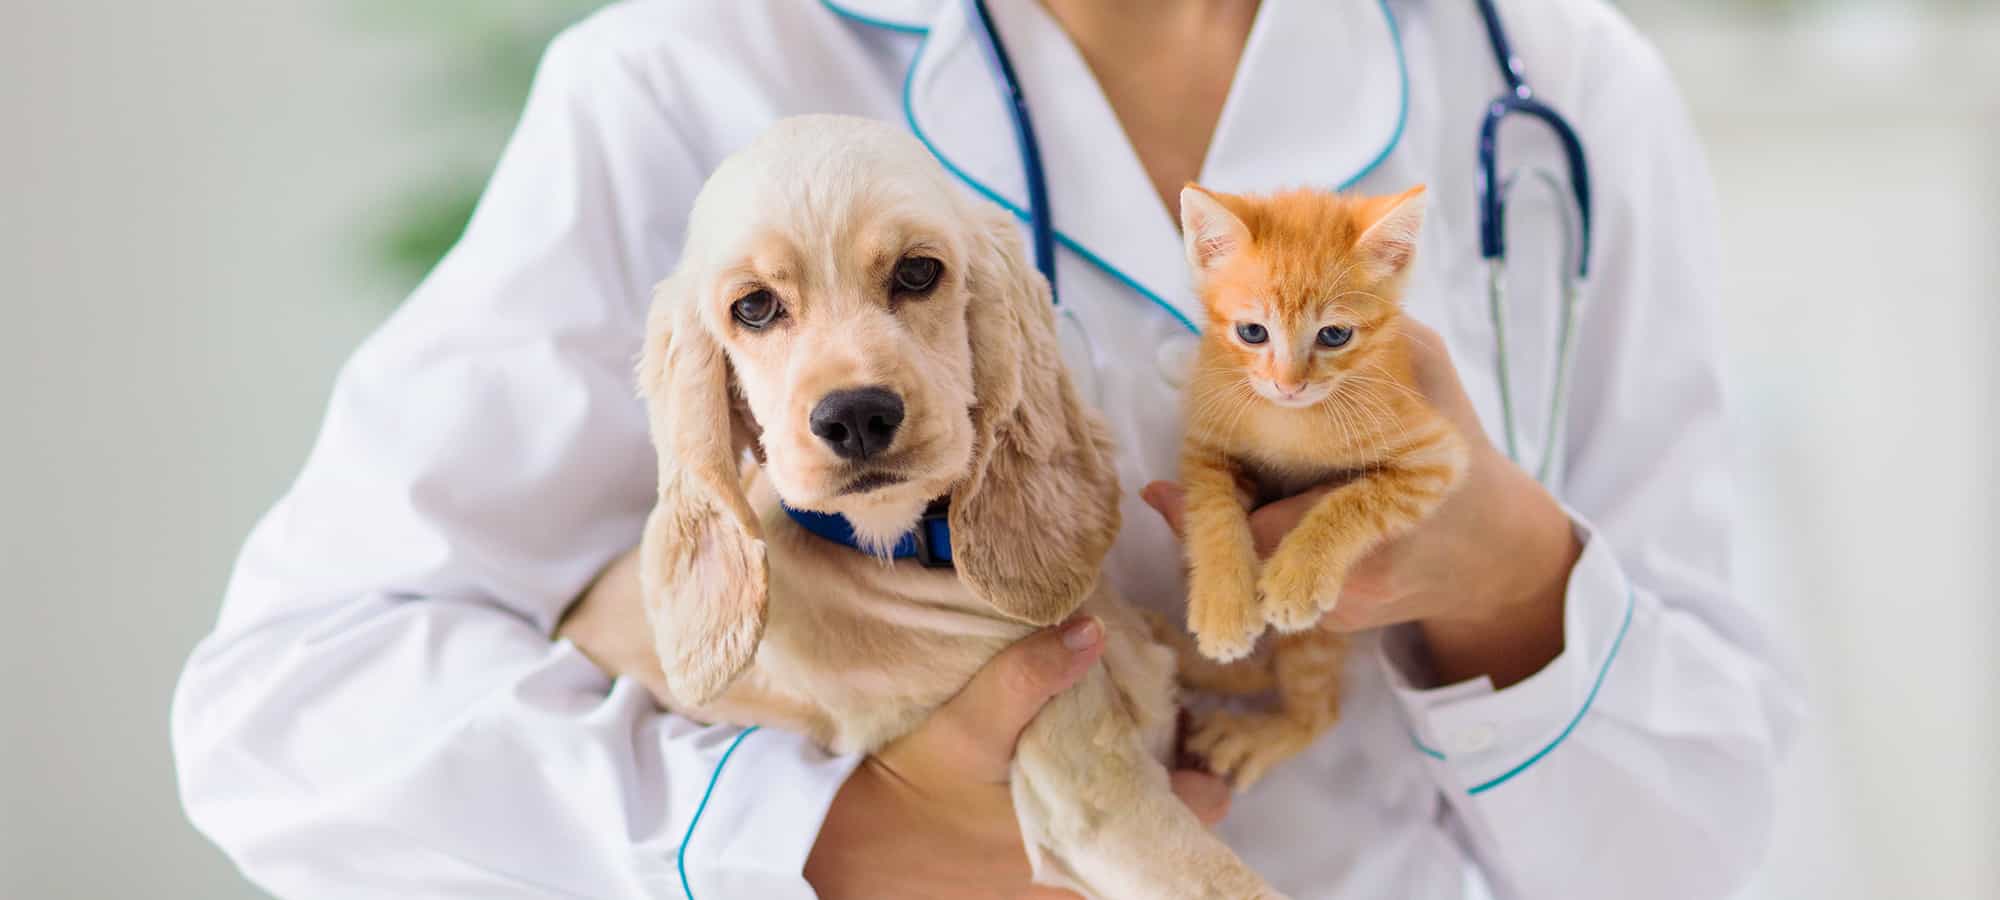 10 Important Things to Look for in a Veterinarian